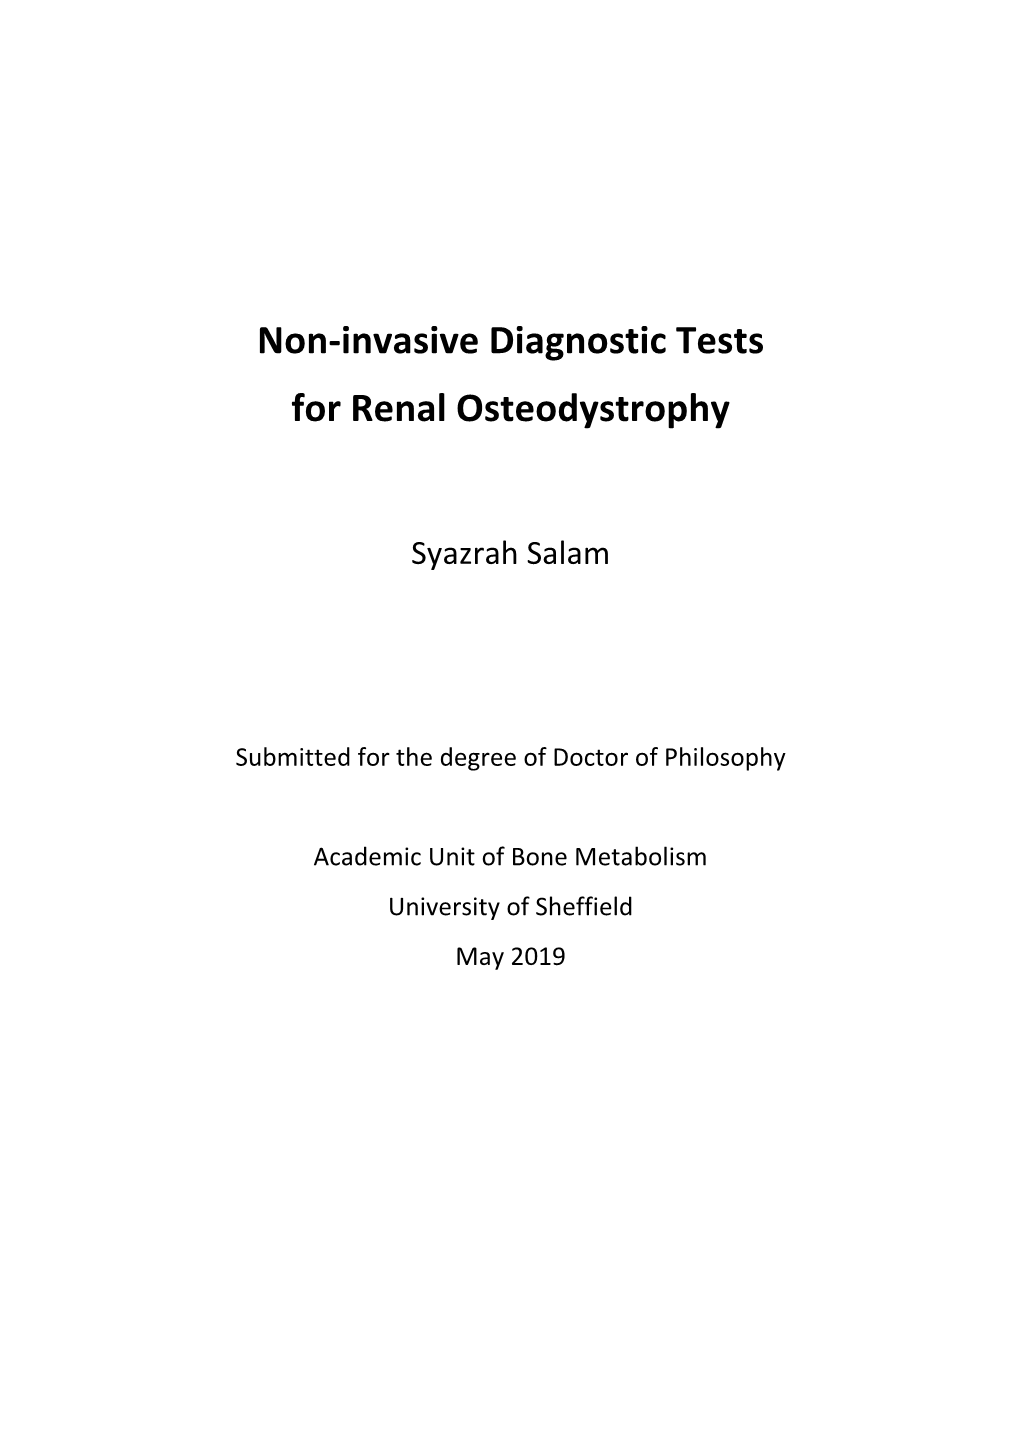 Non-Invasive Diagnostic Tests for Renal Osteodystrophy